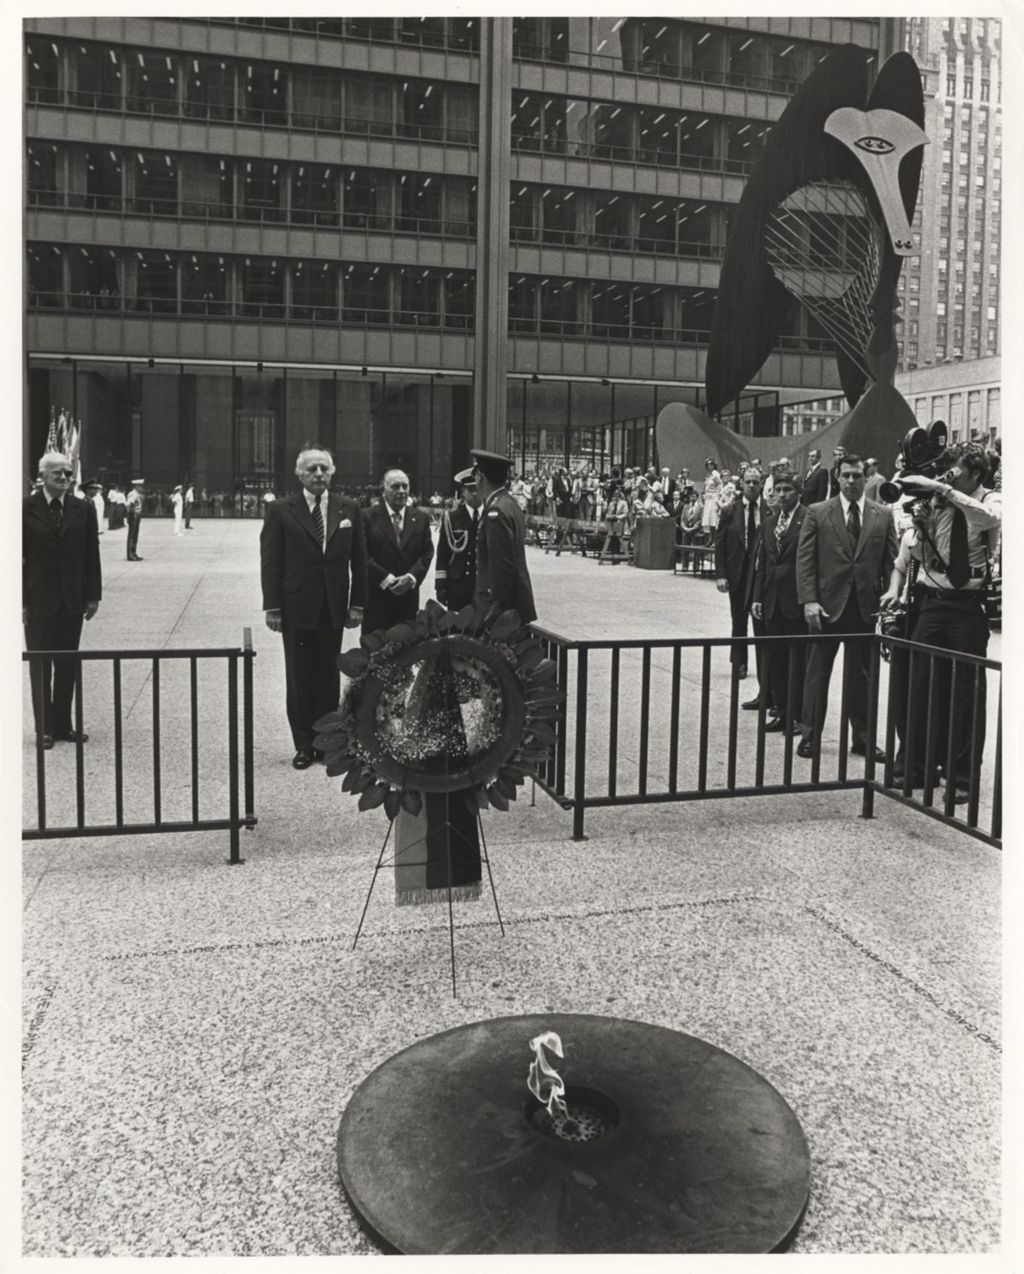 Miniature of German President Walter Scheel at the eternal flame in Civic Center Plaza